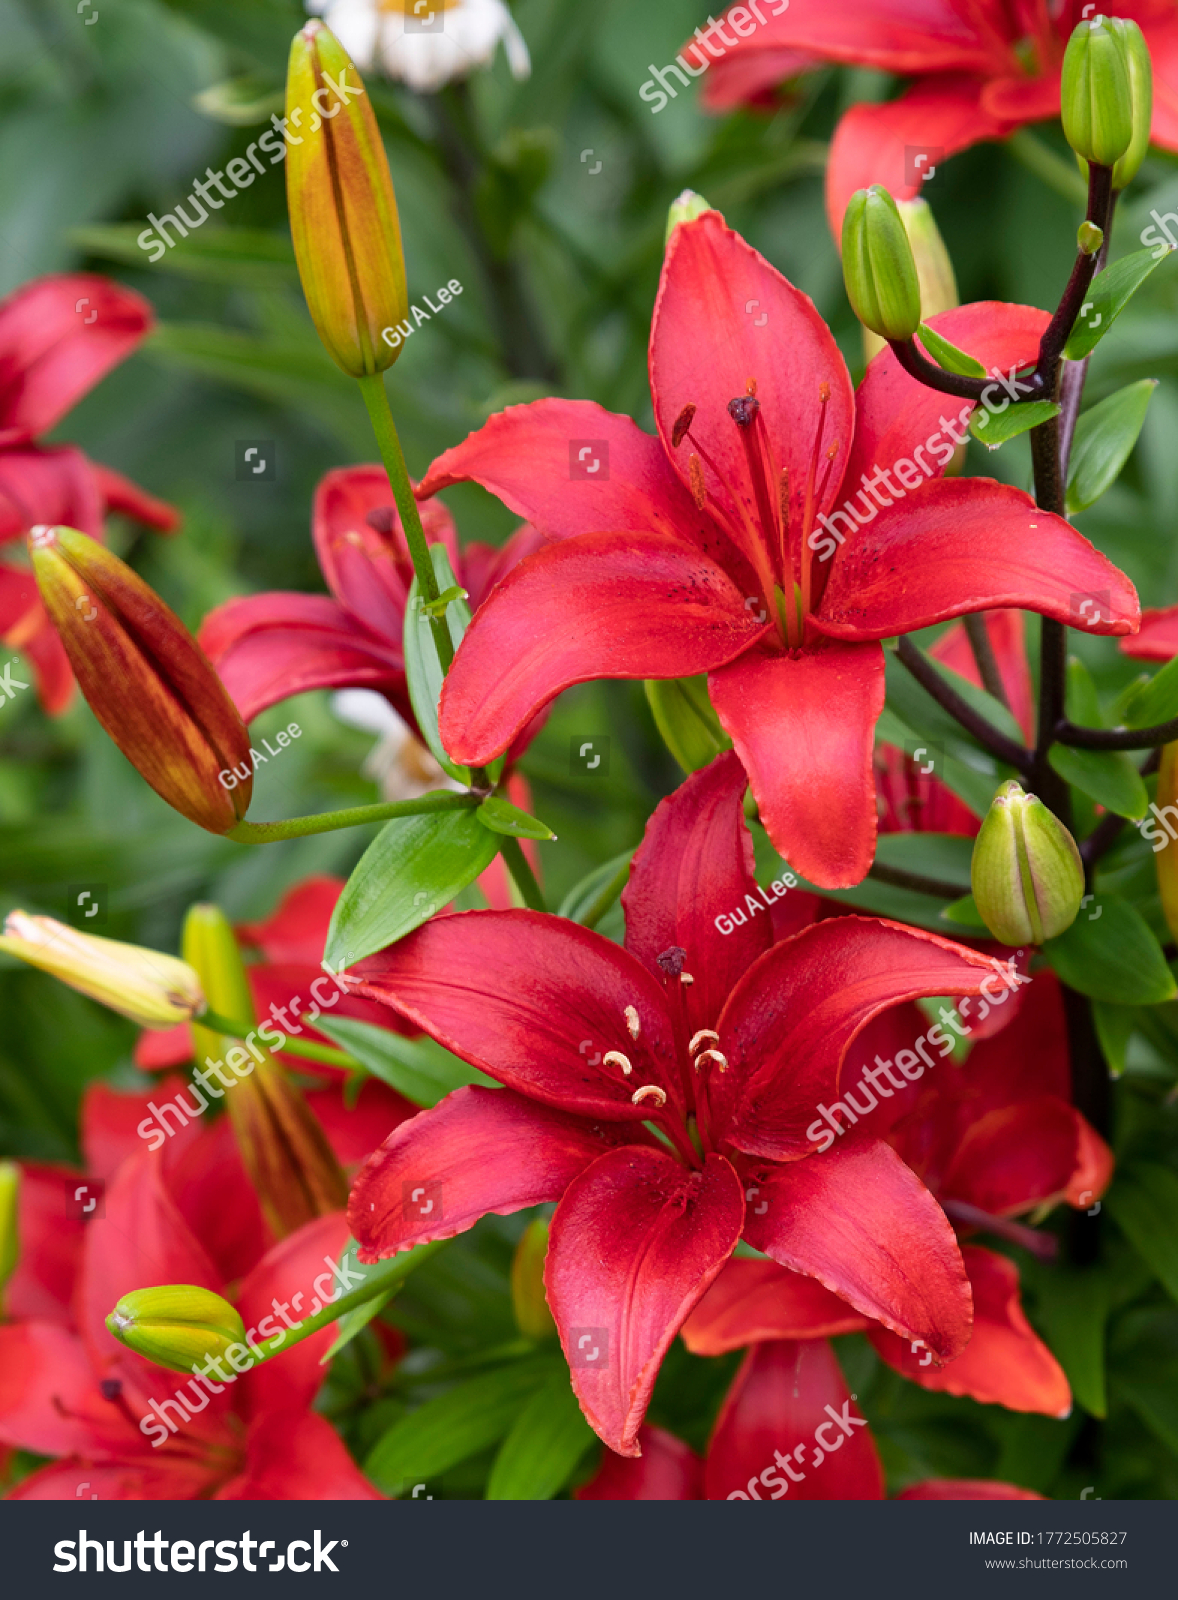 Lilies with red flowers in the form of stars and buds on a background of bright green leaves. #1772505827